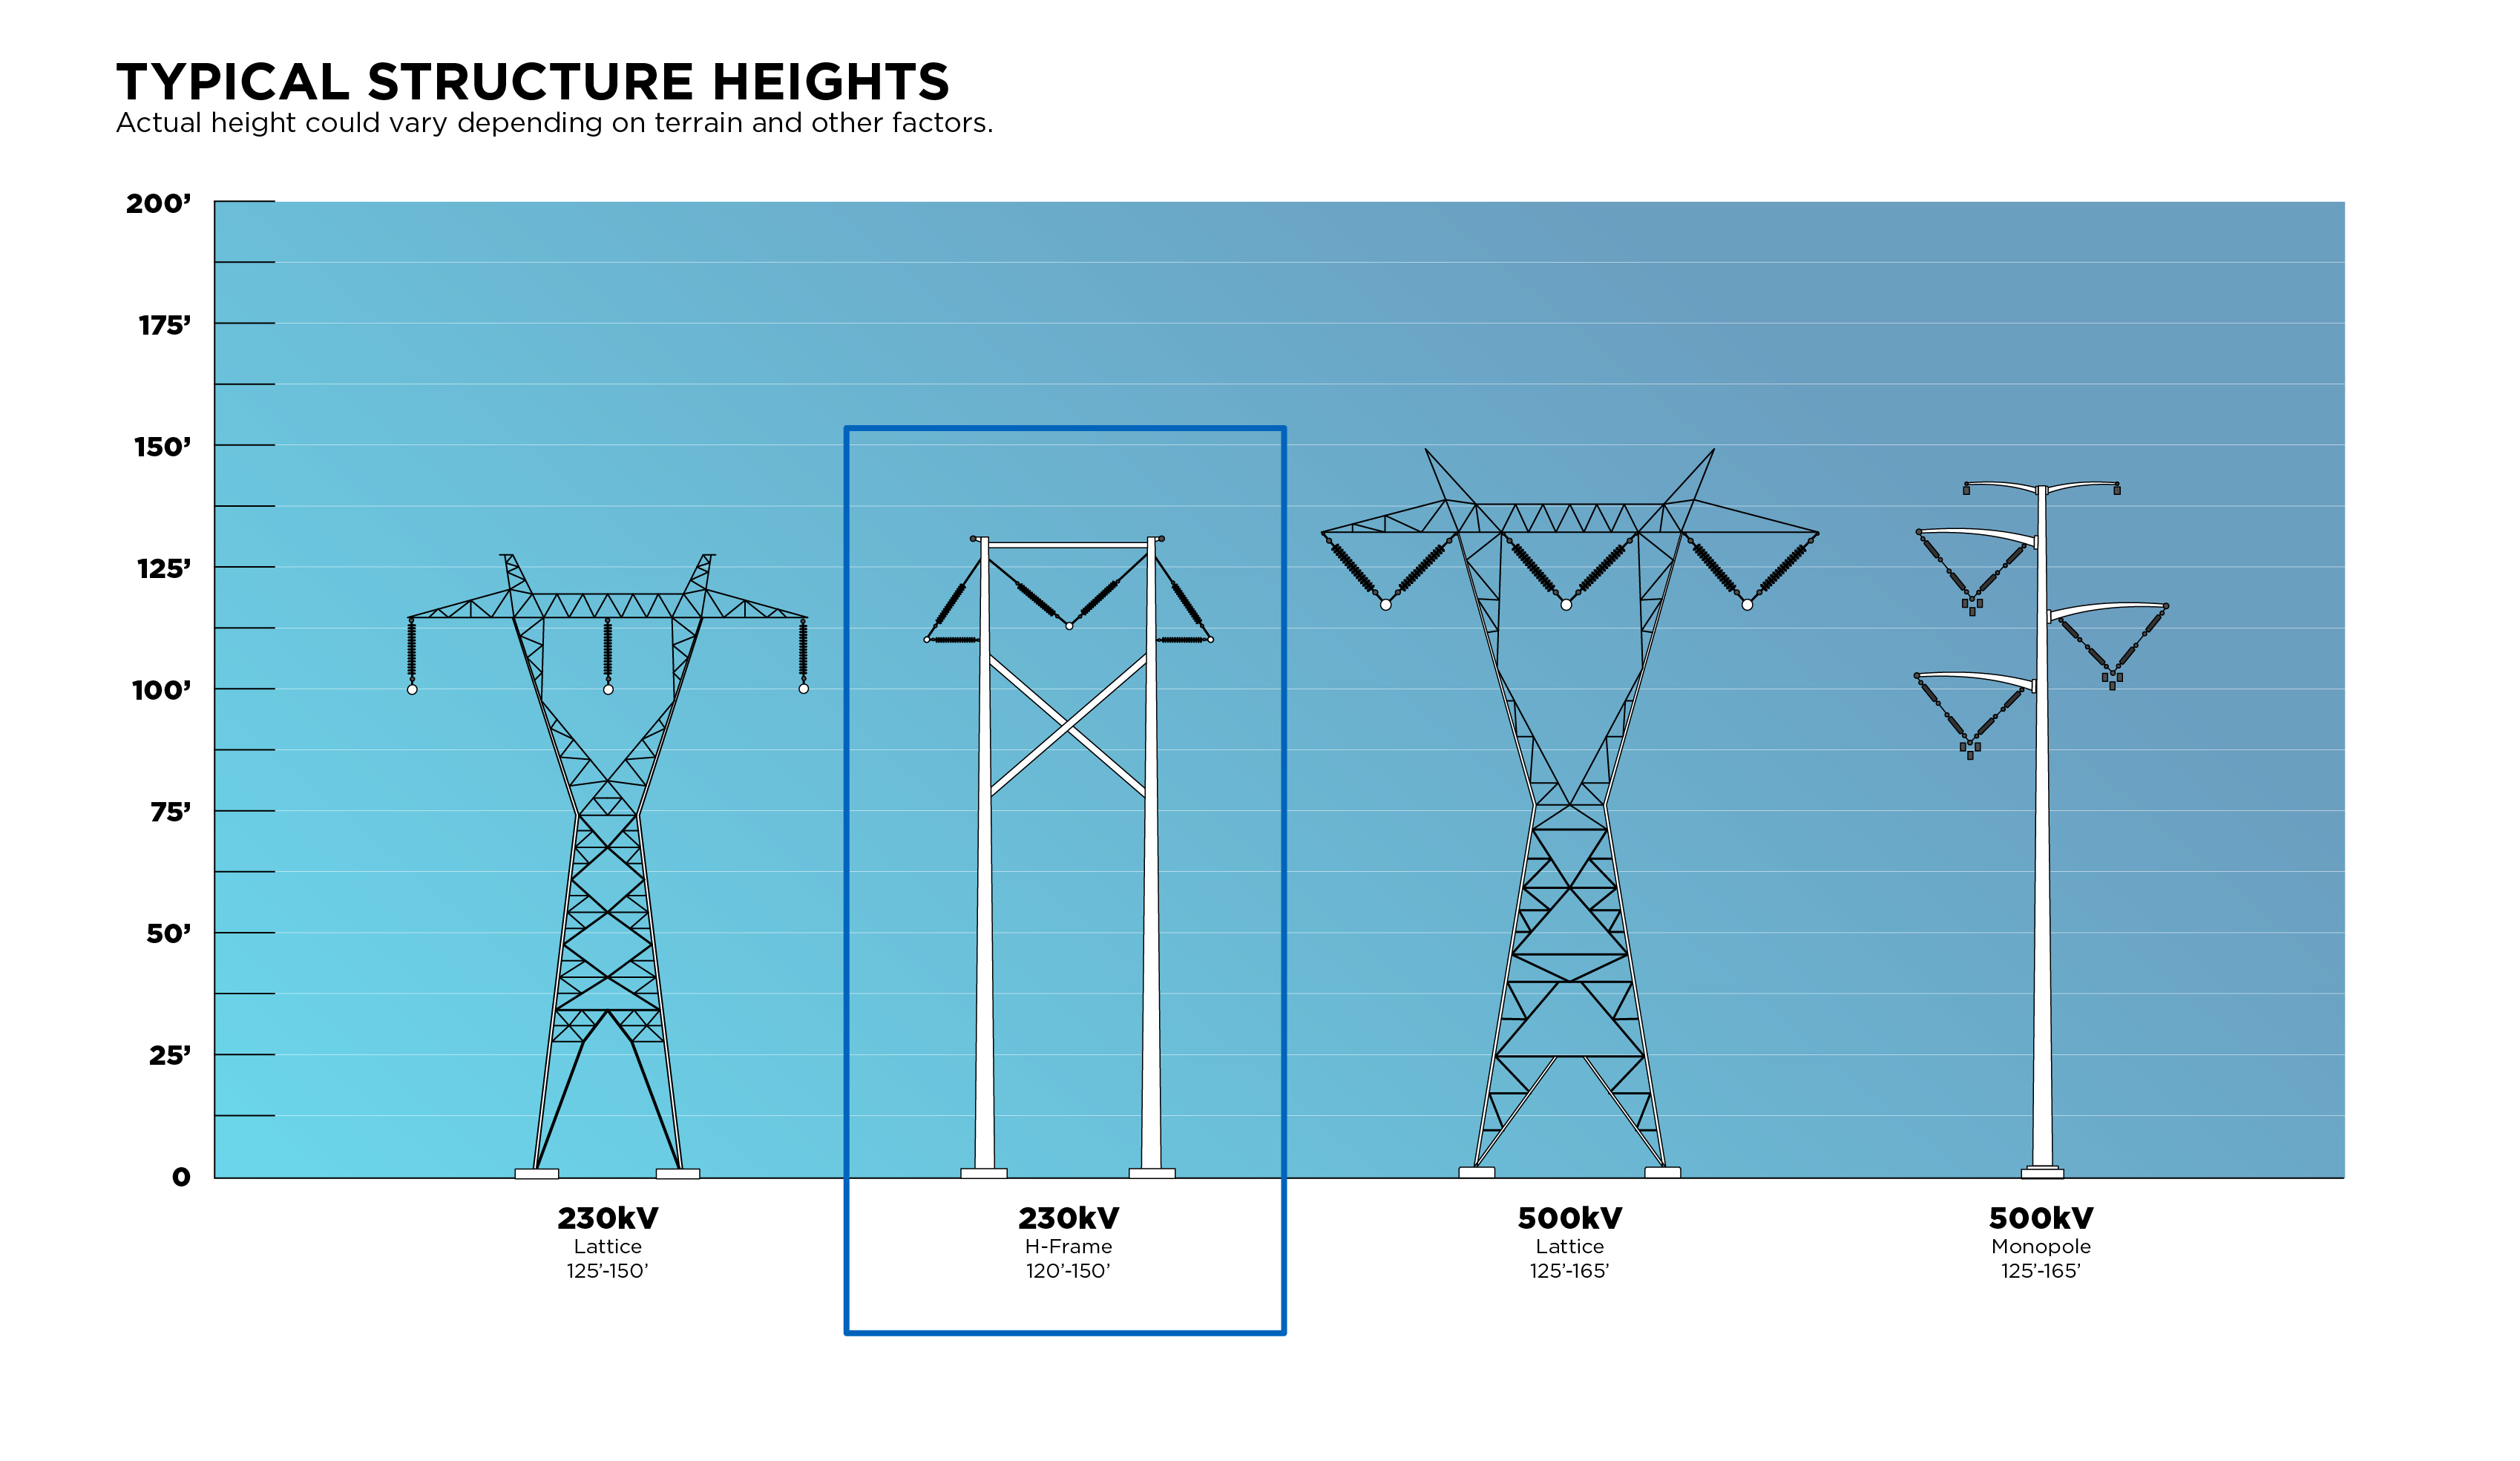 Example of a 230kV h-frame structure compared to other types of power poles